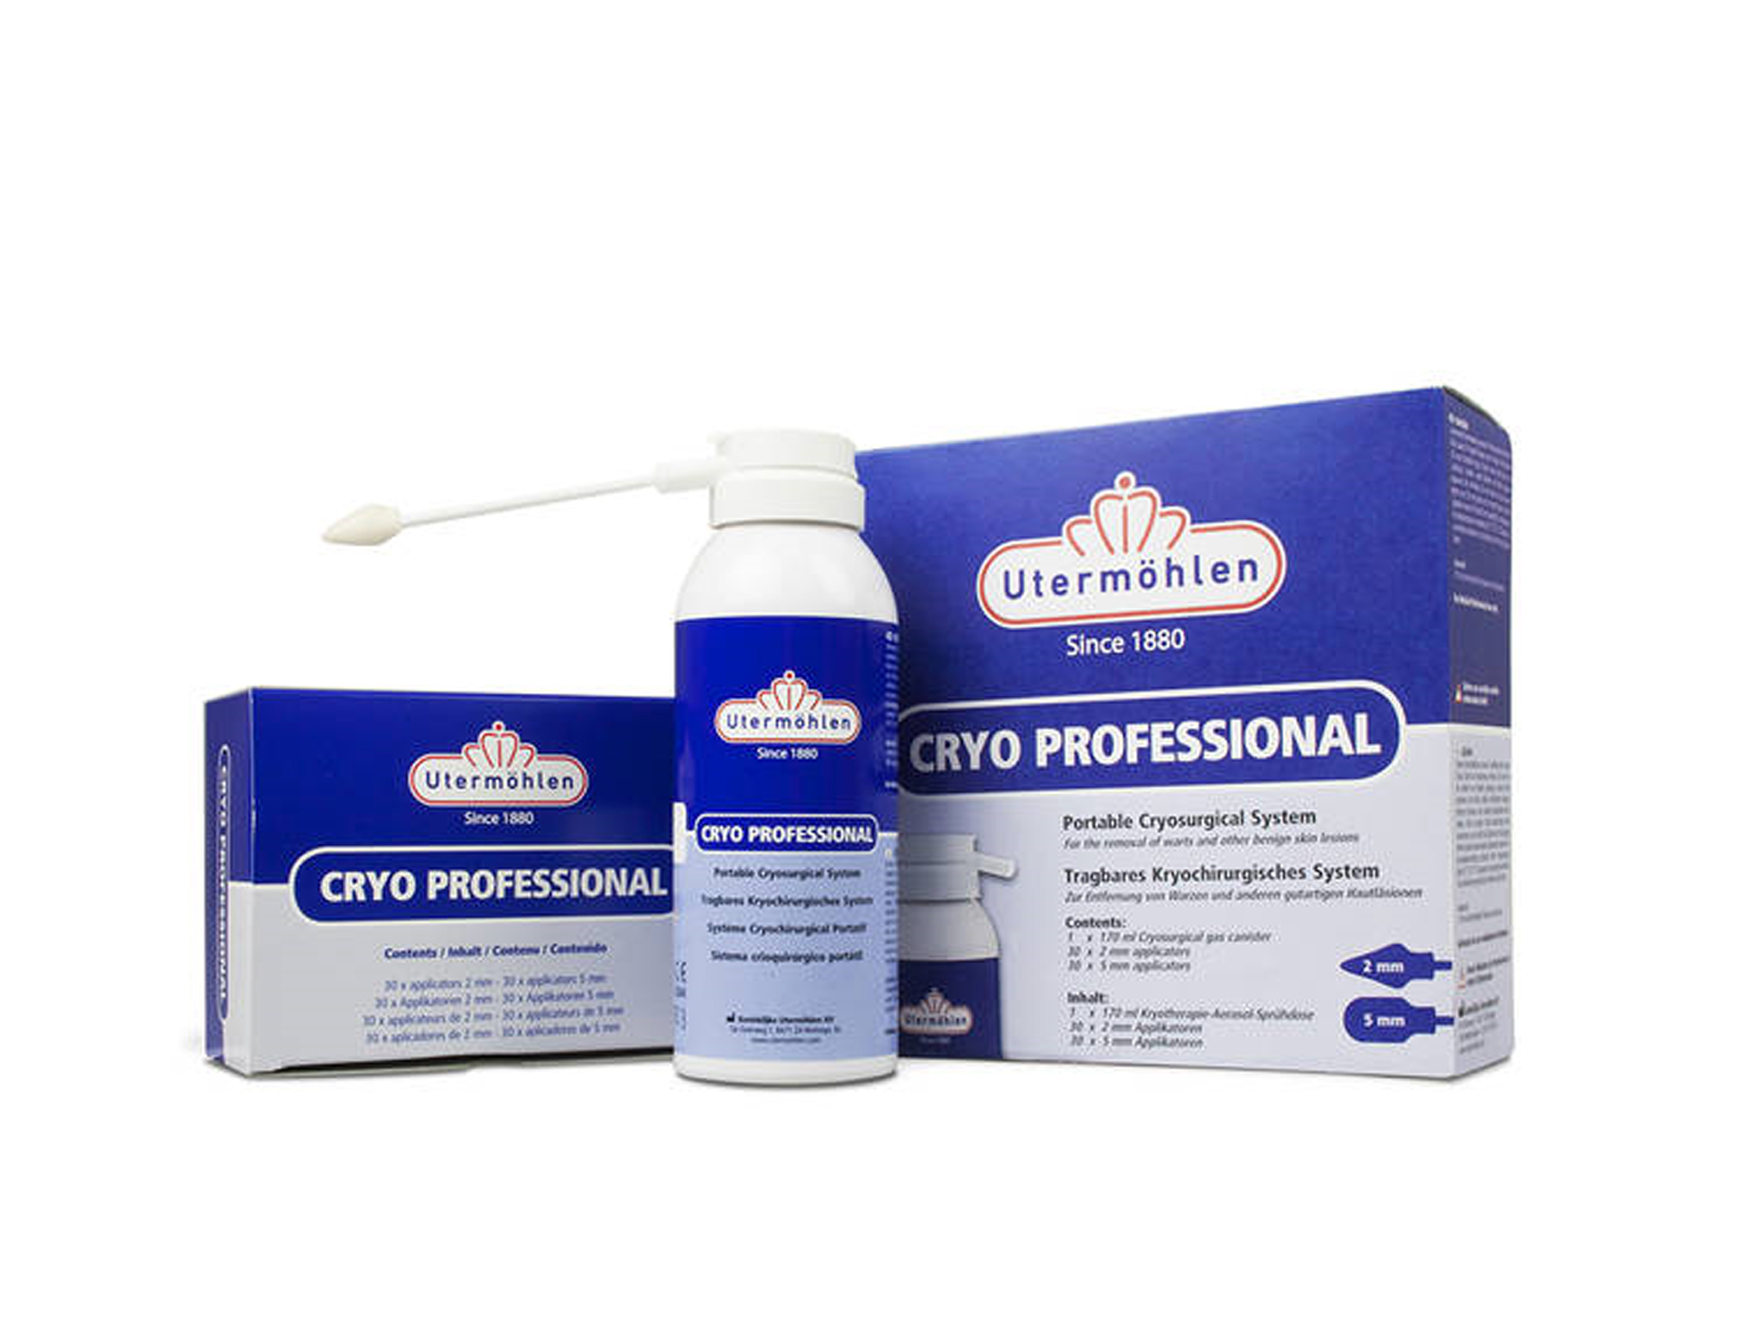 Cryo Professional 170 ml + 50 embouts (5mm) - 1 pc